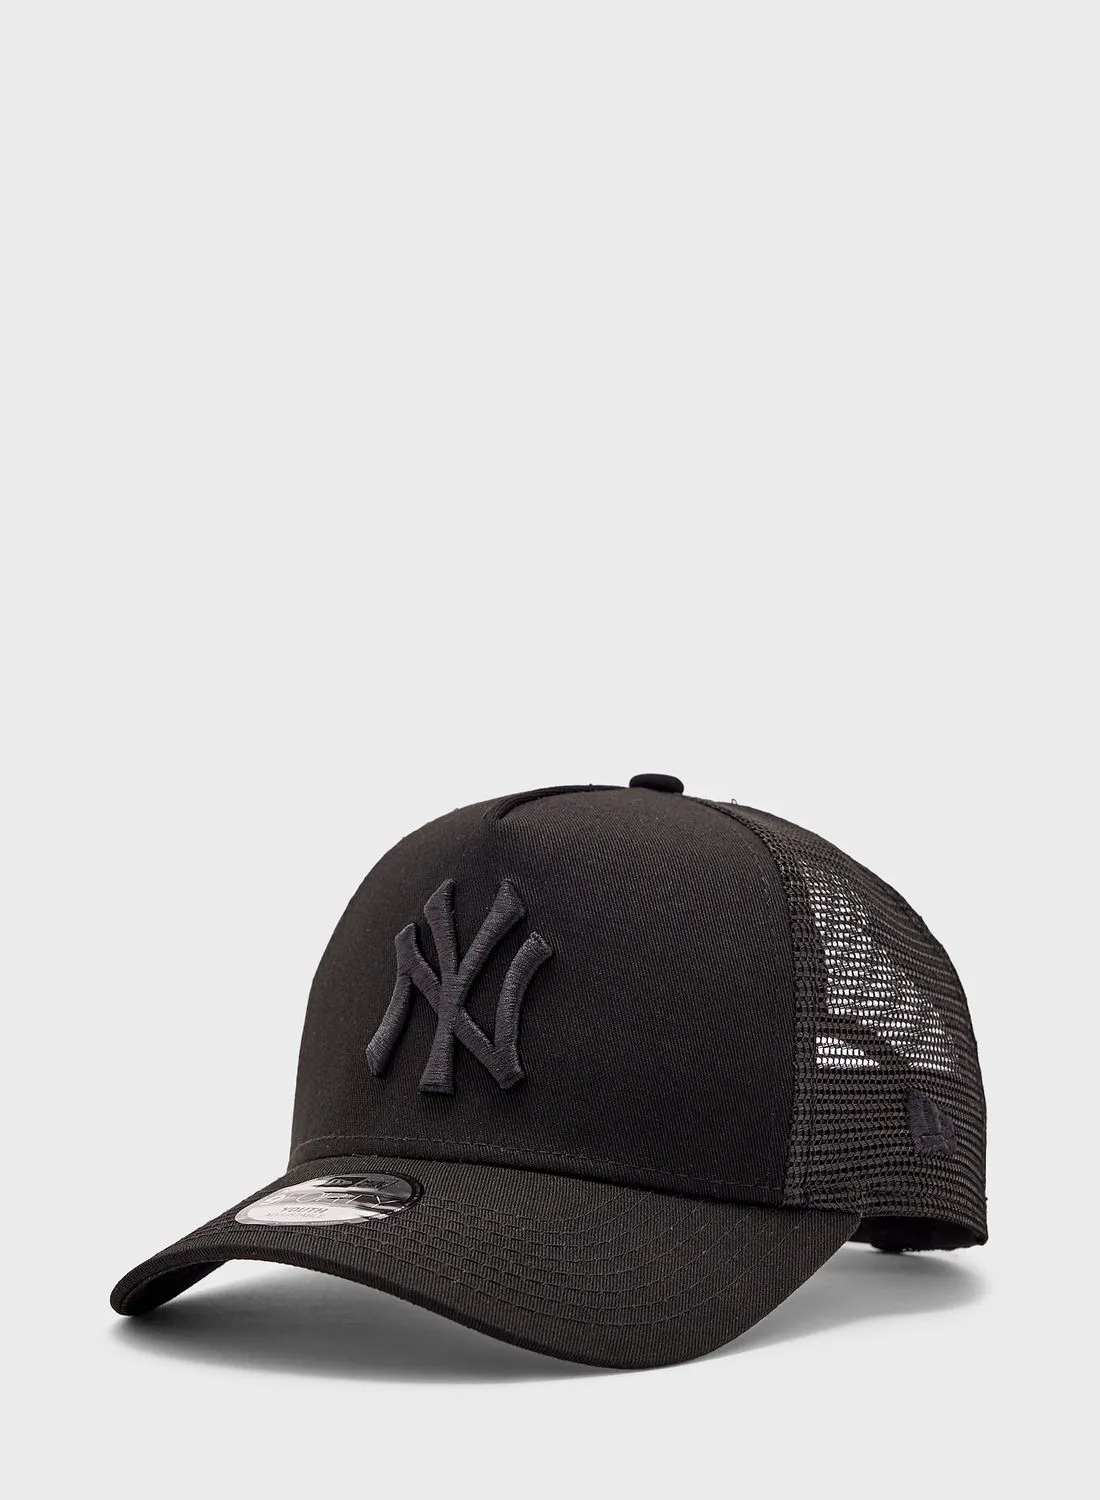 NEW ERA Youth 9Forty New York Yankees Cap